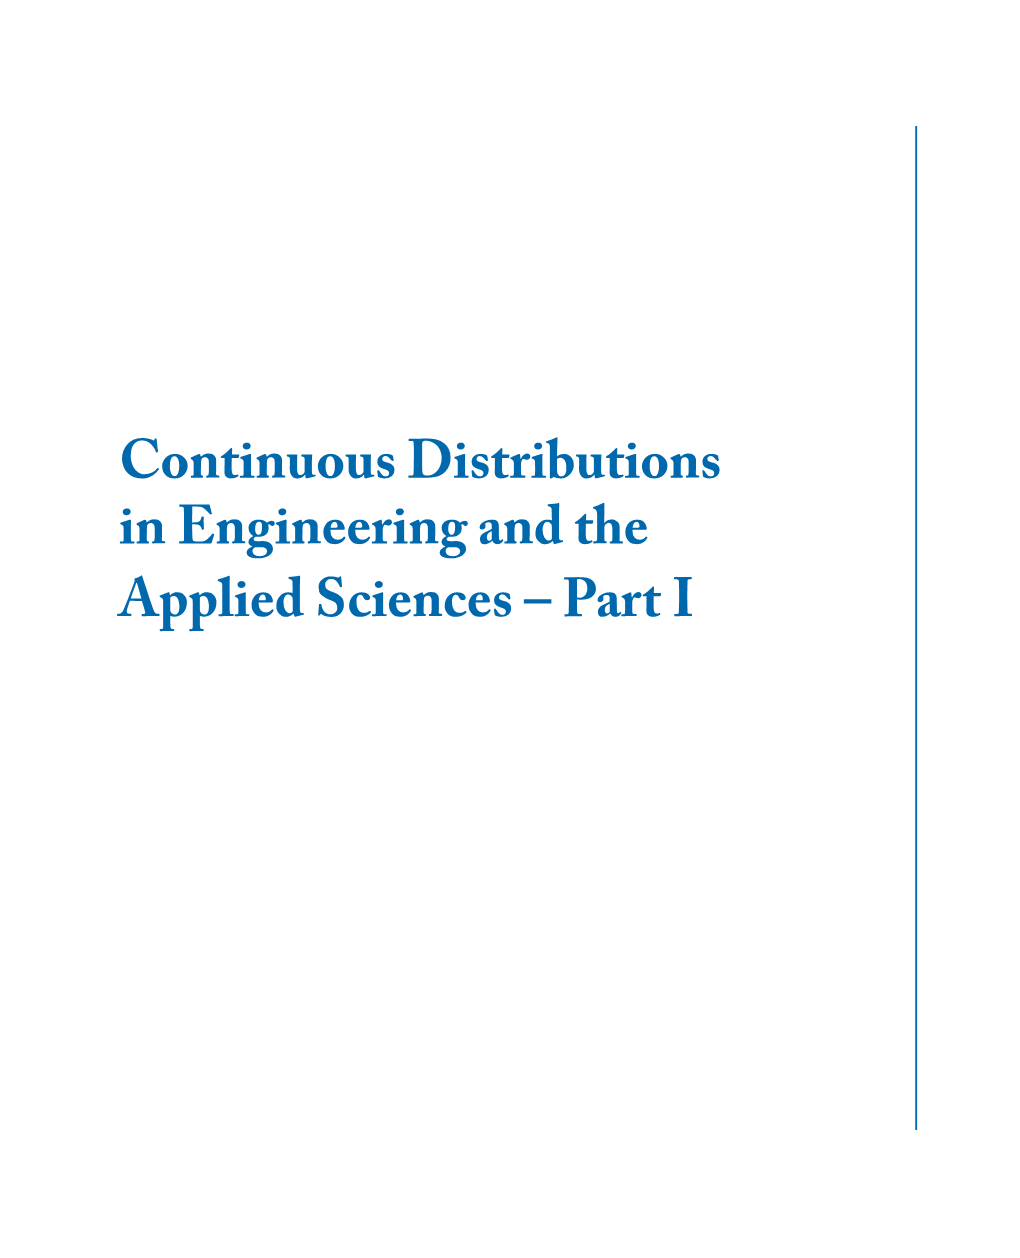 Continuous Distributions in Engineering and the Applied Sciences – Part I Synthesis Lectures on Mathematics and Statistics